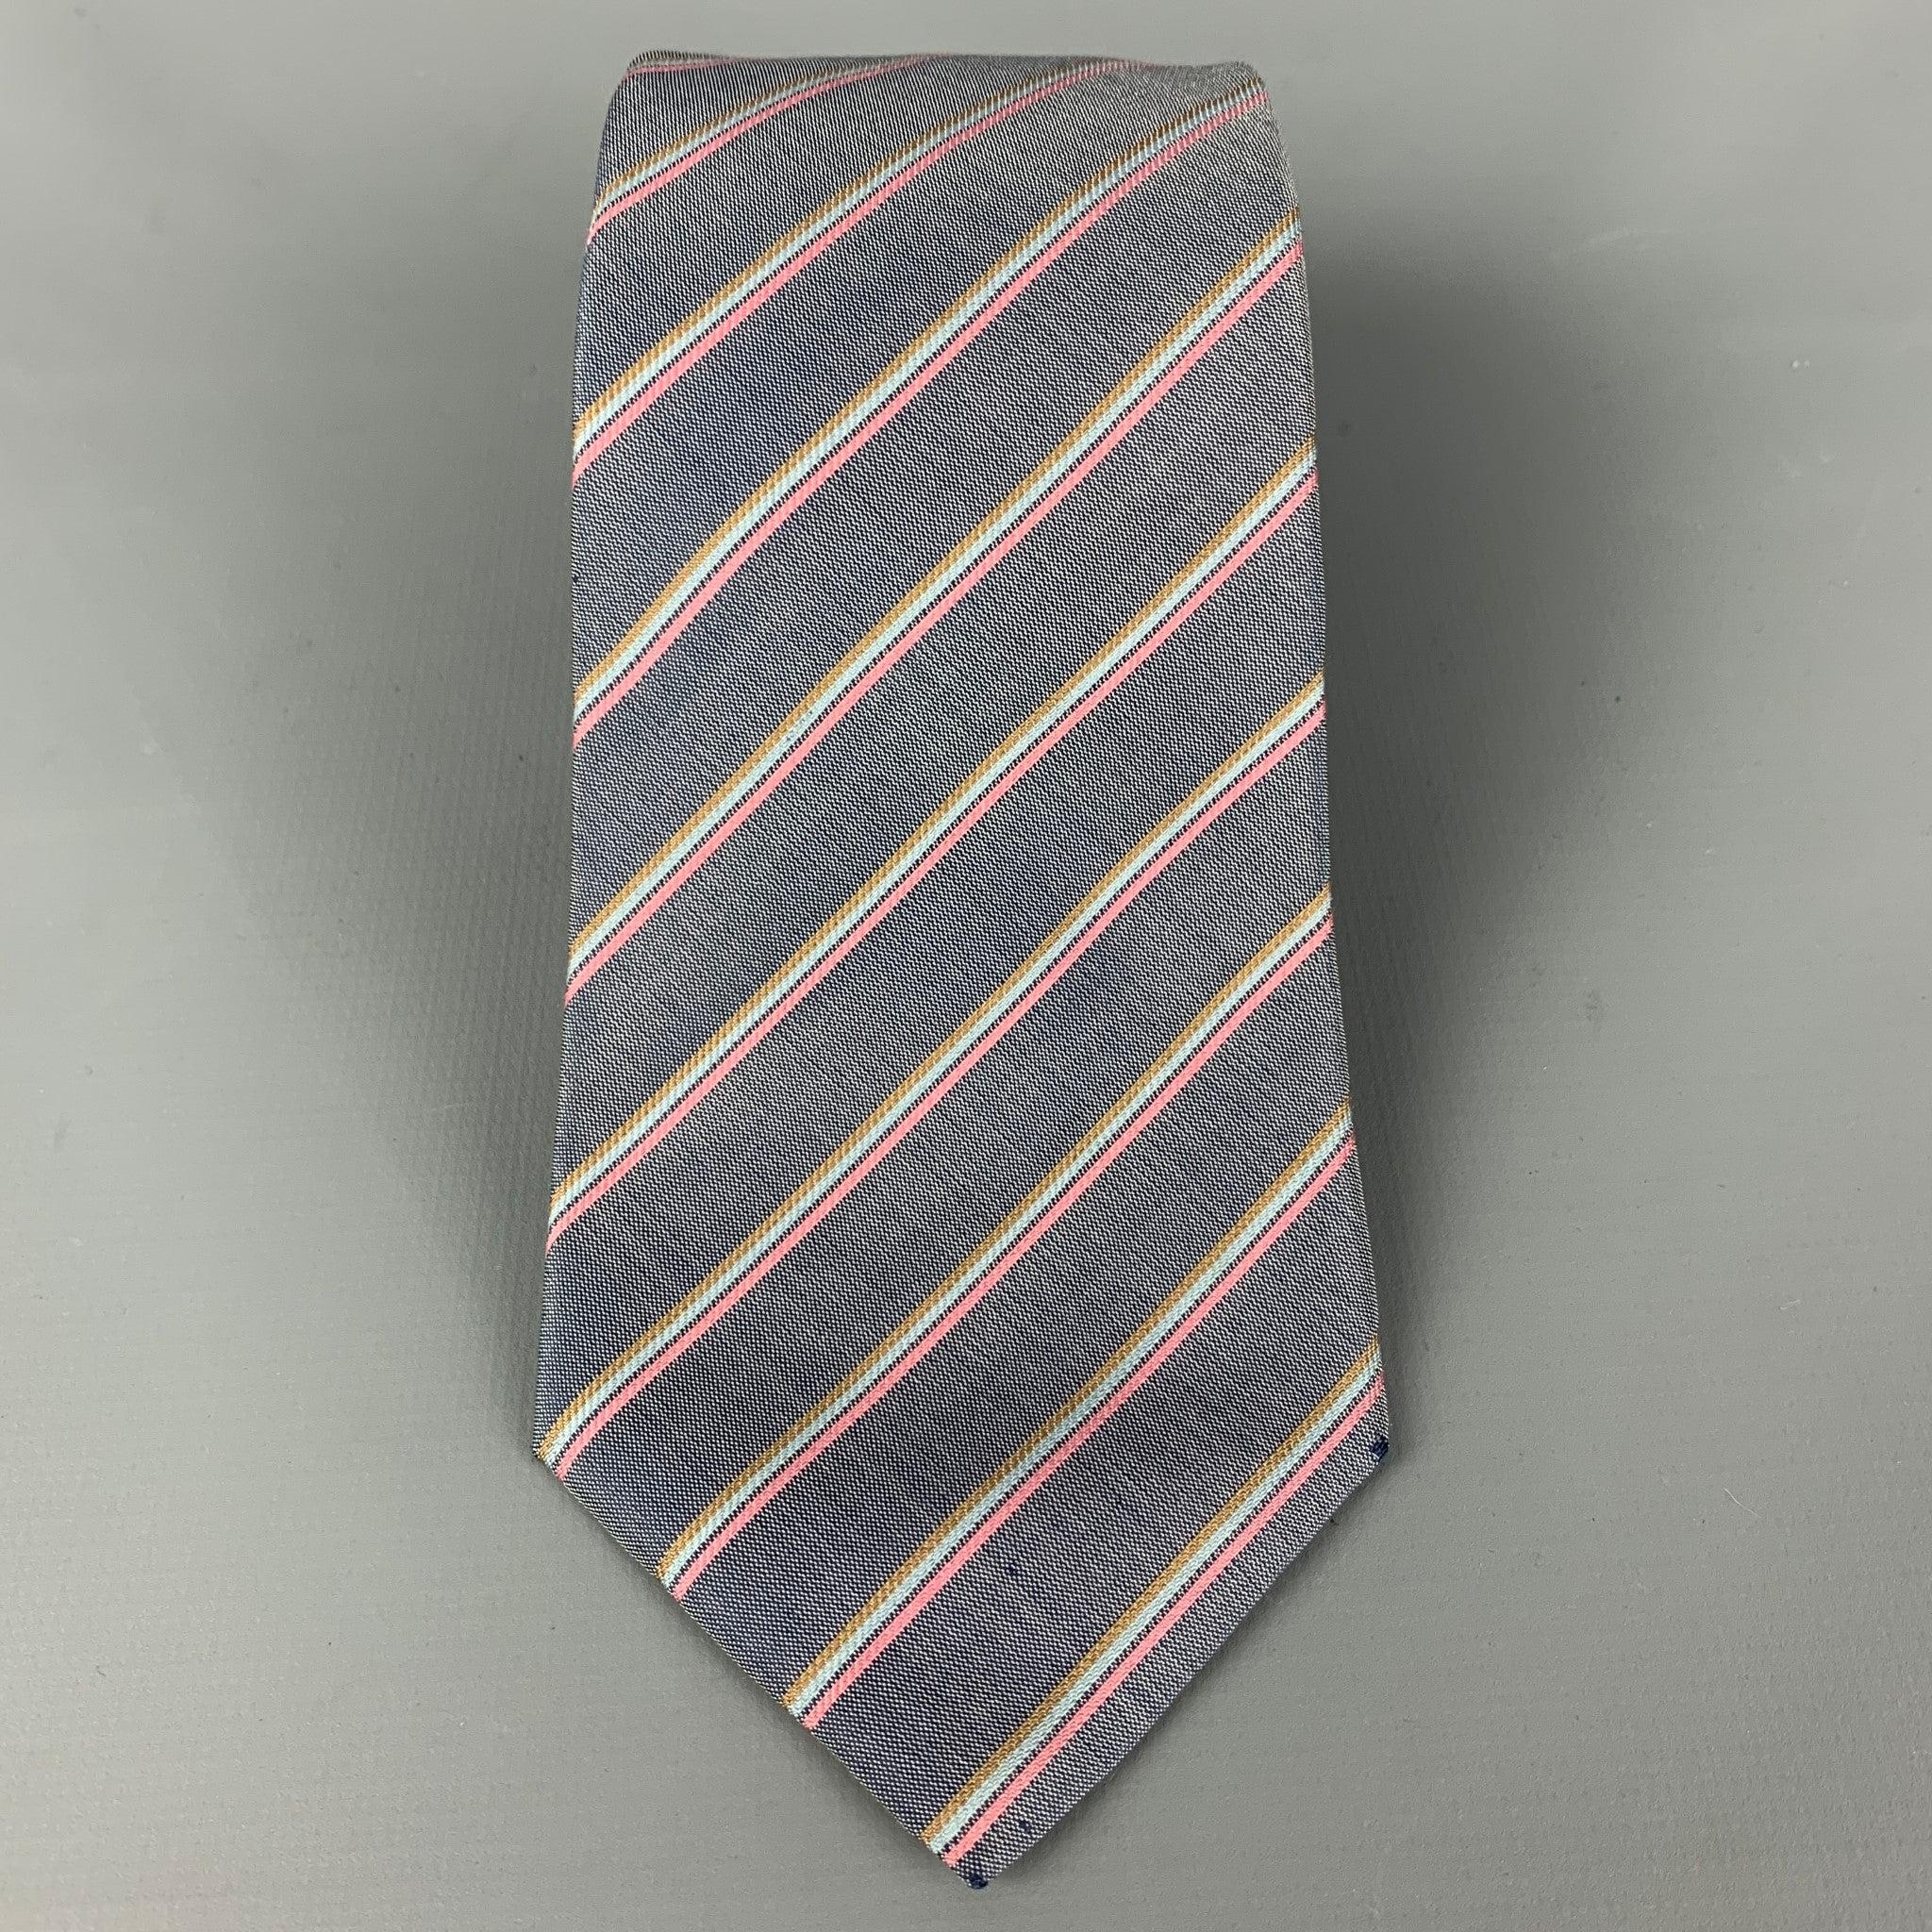 Vintage ISSEY MIYAKE
necktie comes in a silk with a all over diagonal stripe print.  Very Good Pre-Owned Condition.Width: 3 inches 
  
  
 
Reference: 118021
Category: Tie
More Details
    
Brand:  ISSEY MIYAKE
Color:  Grey
Color 2:  Pink
Pattern: 